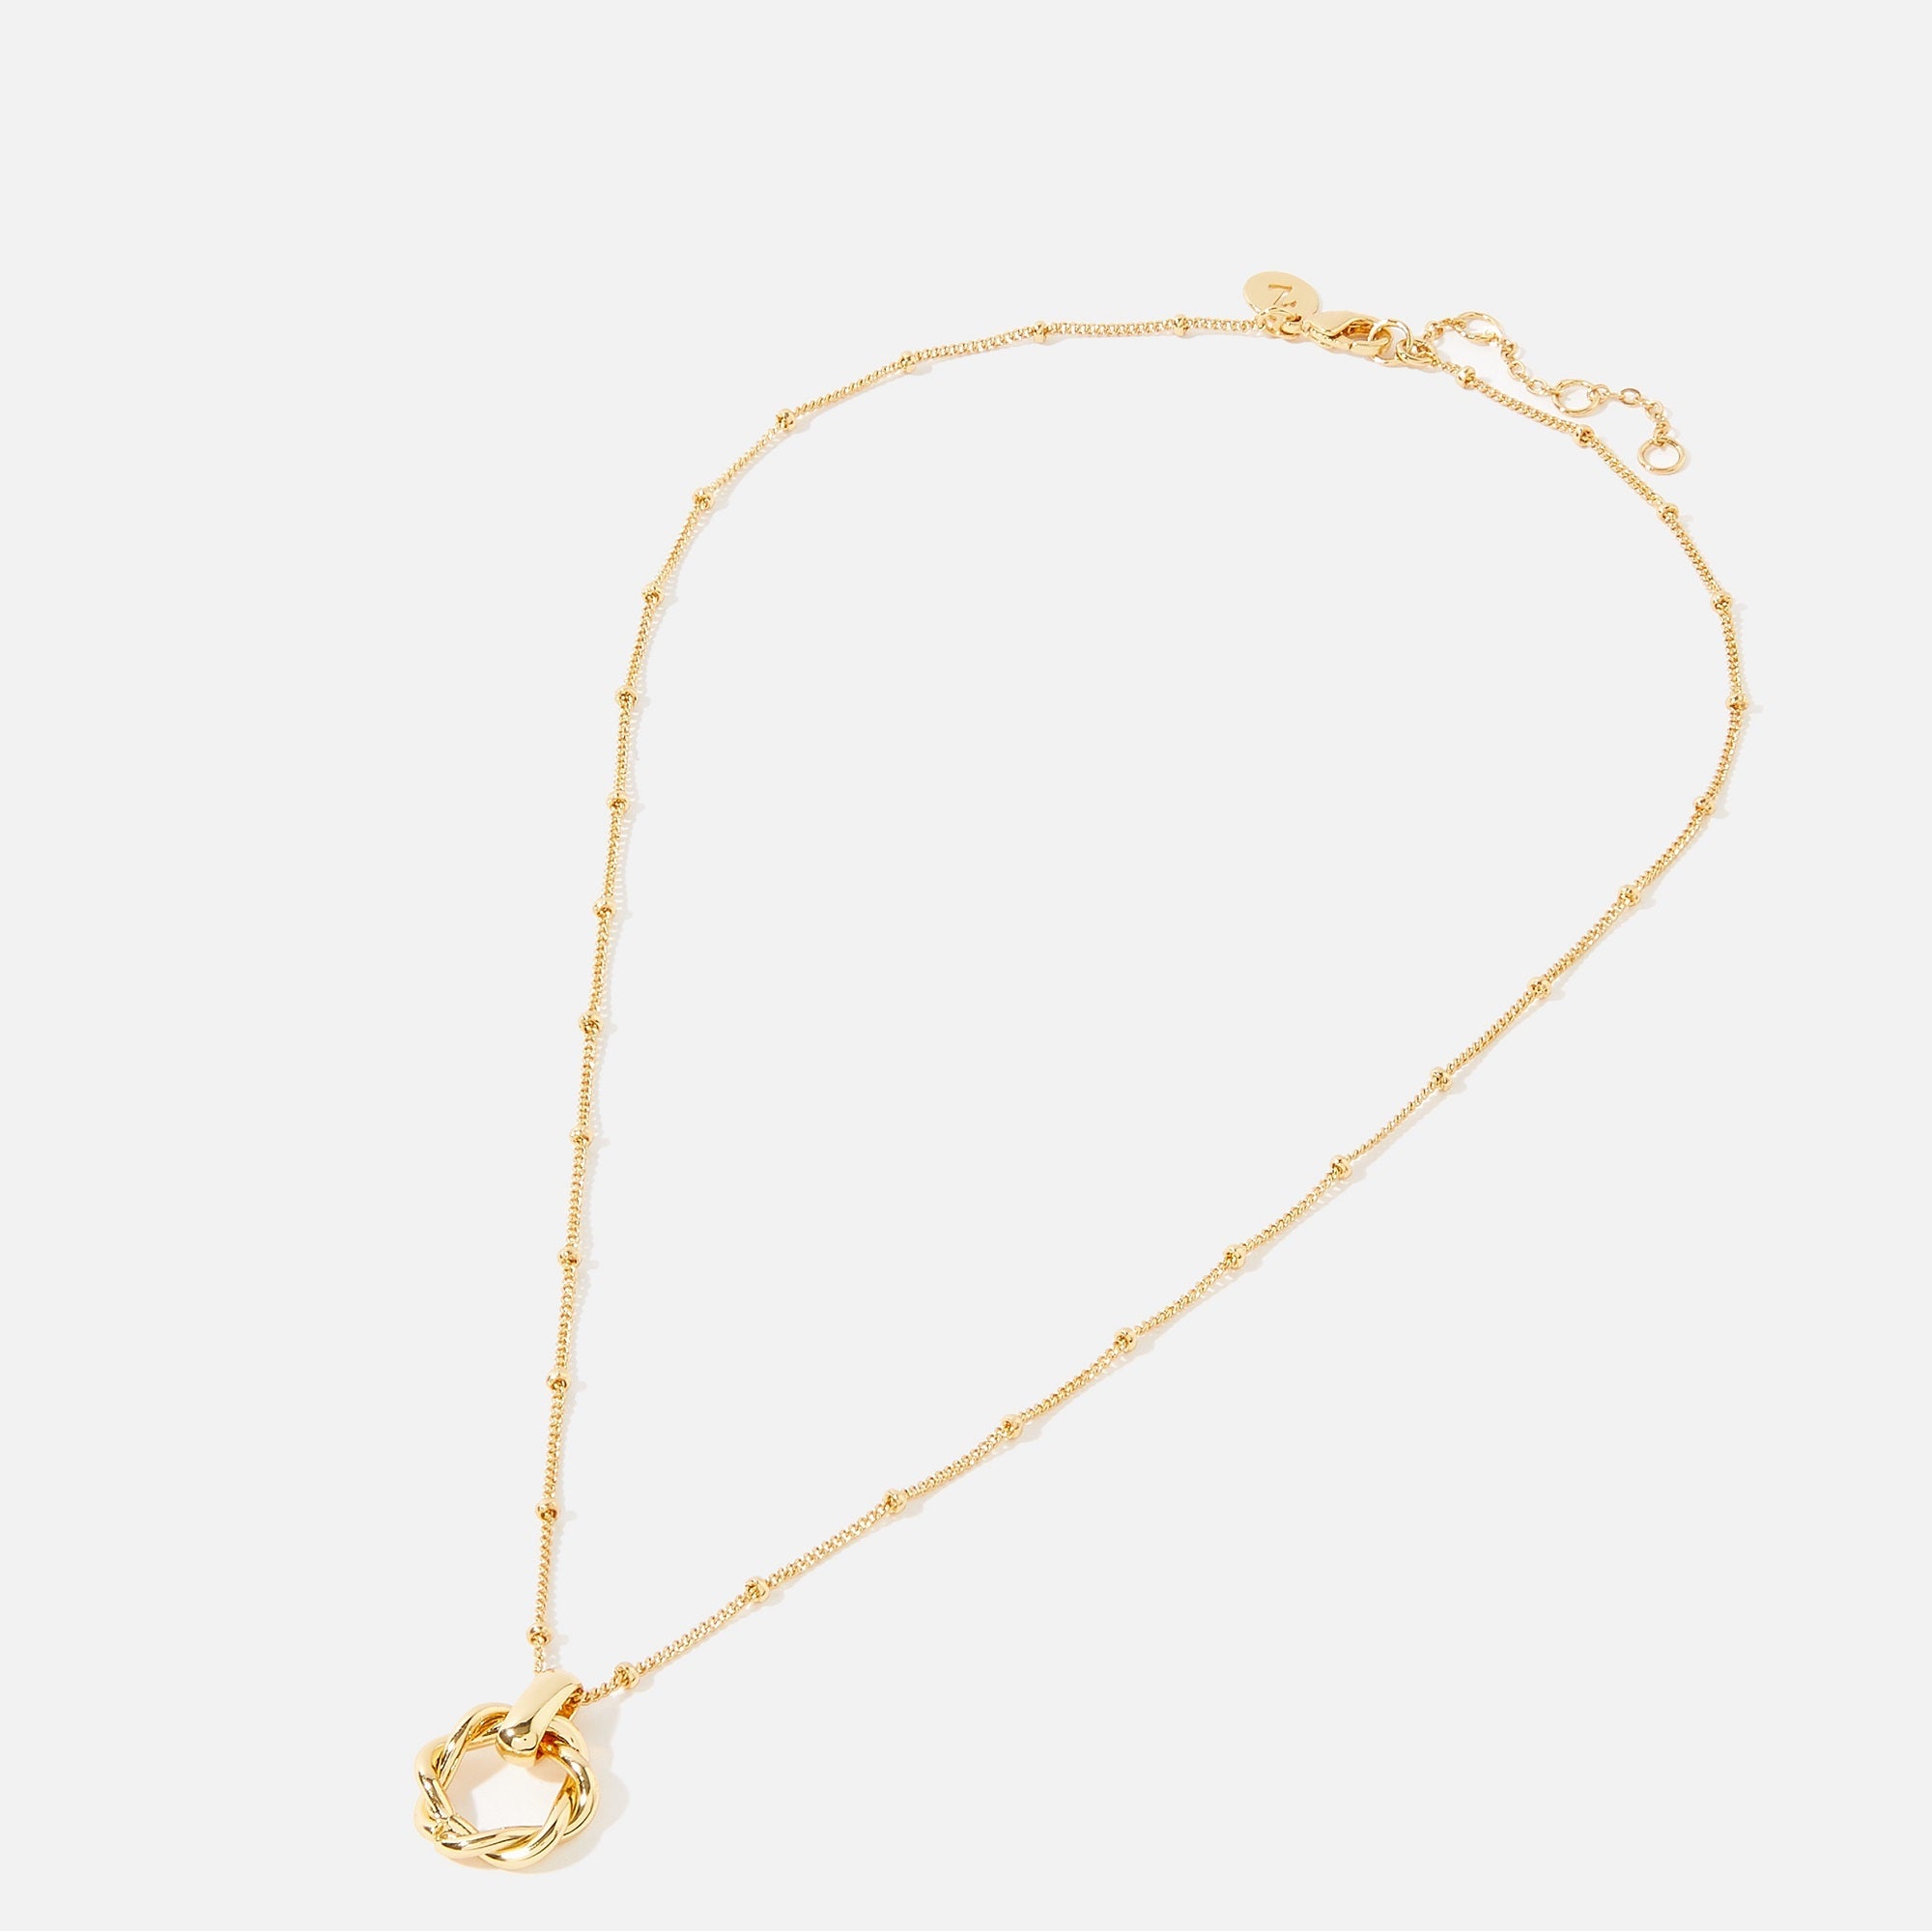 Real Gold Plated Twisted Ring Necklace For Women By Accessorize London